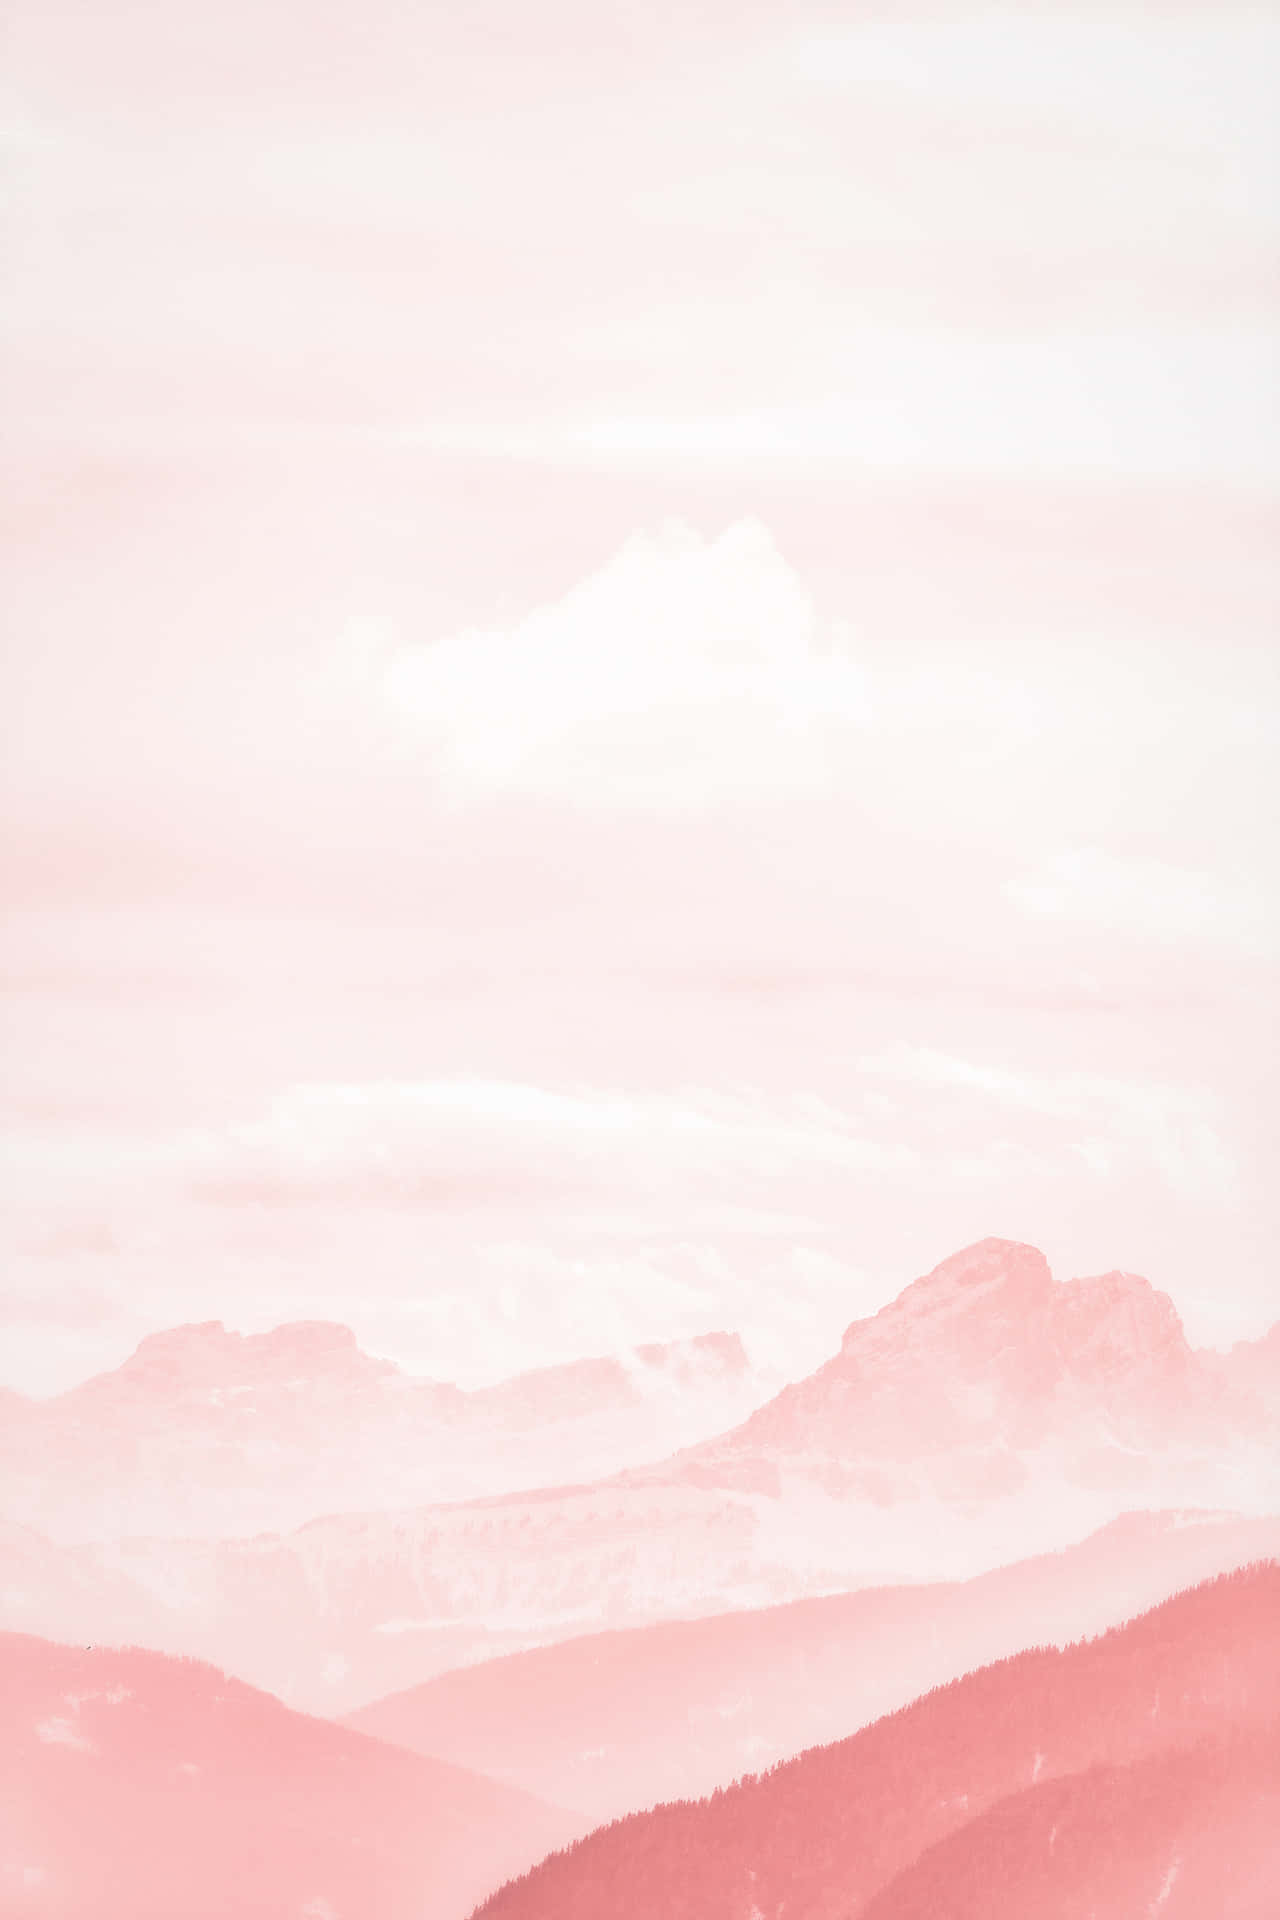 A Pink Sky With Mountains Wallpaper